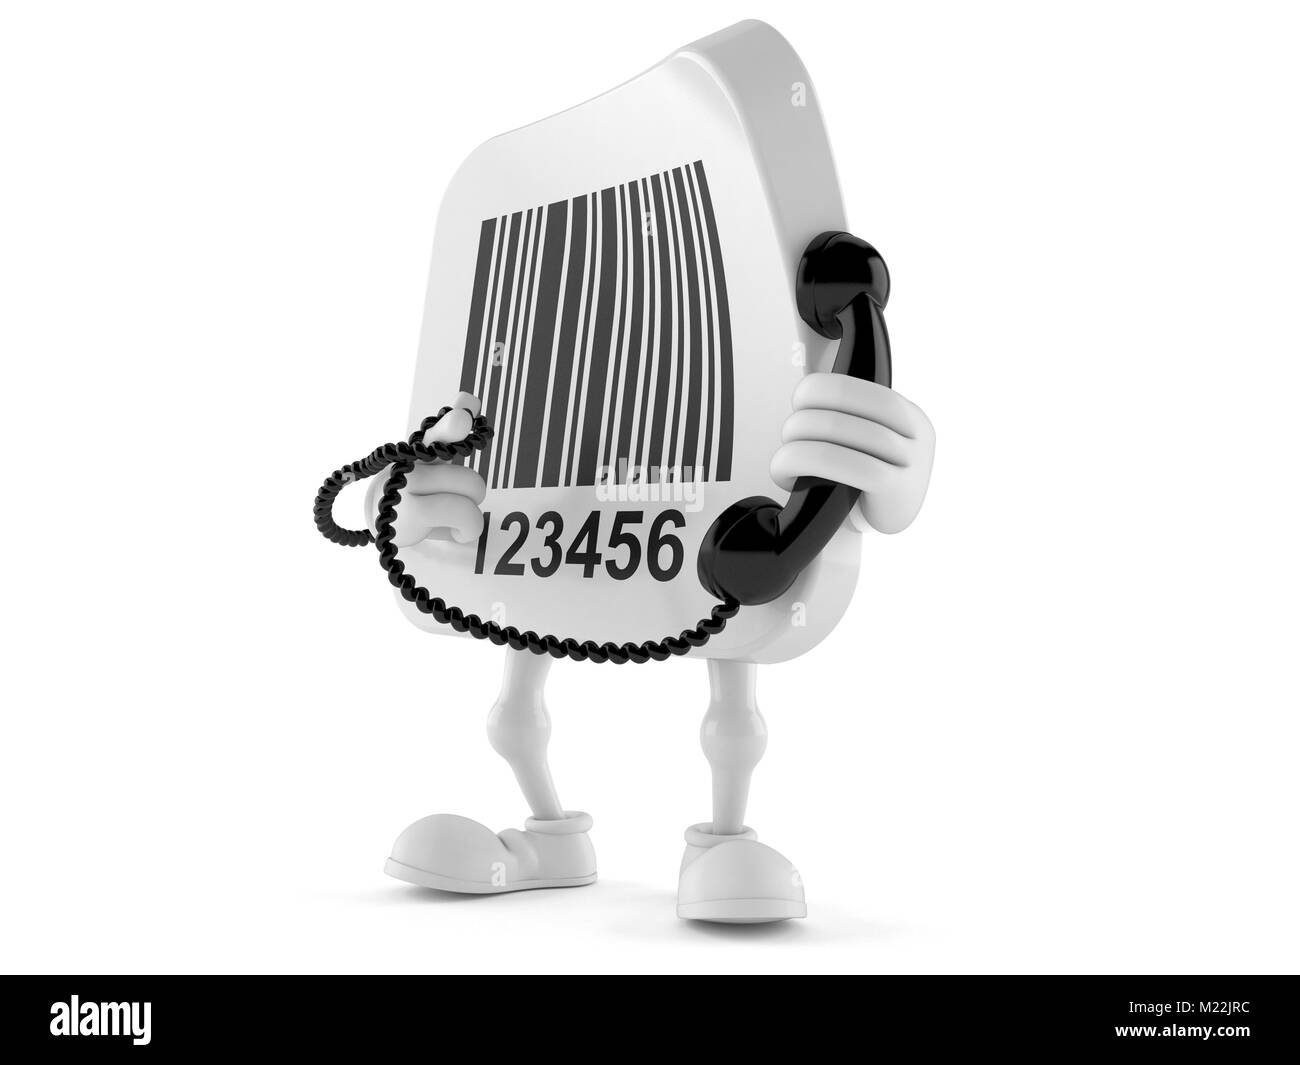 Barcode character holding a telephone handset isolated on white background Stock Photo